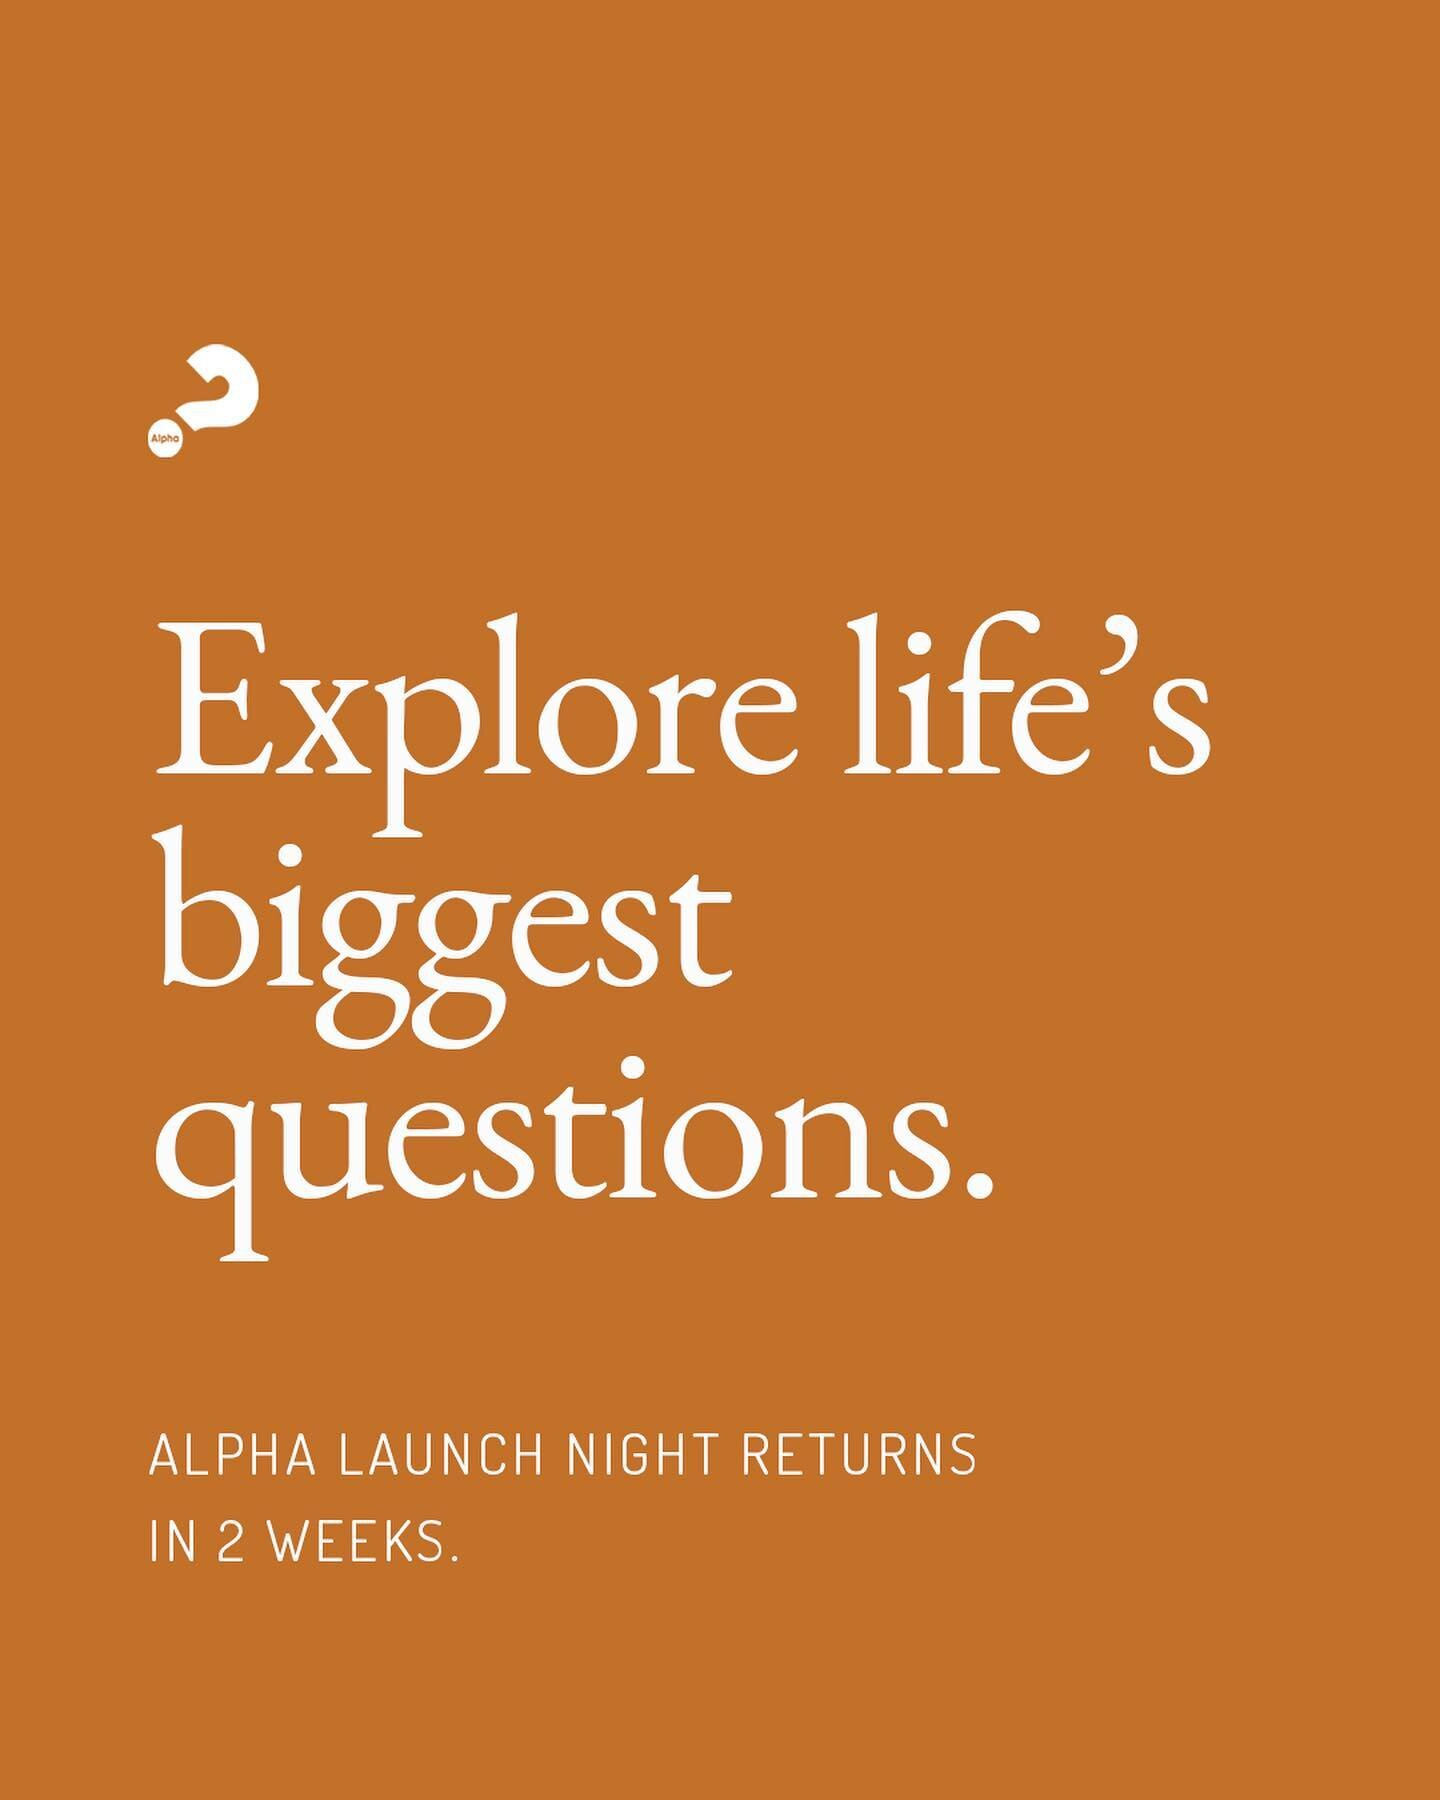 Alpha Launch Night is back on September 20, and you're invited. If you have friends who would not consider themselves Christians or those who are rethinking their faith, send them a text to invite them to Alpha! We promise that it will be a fun night